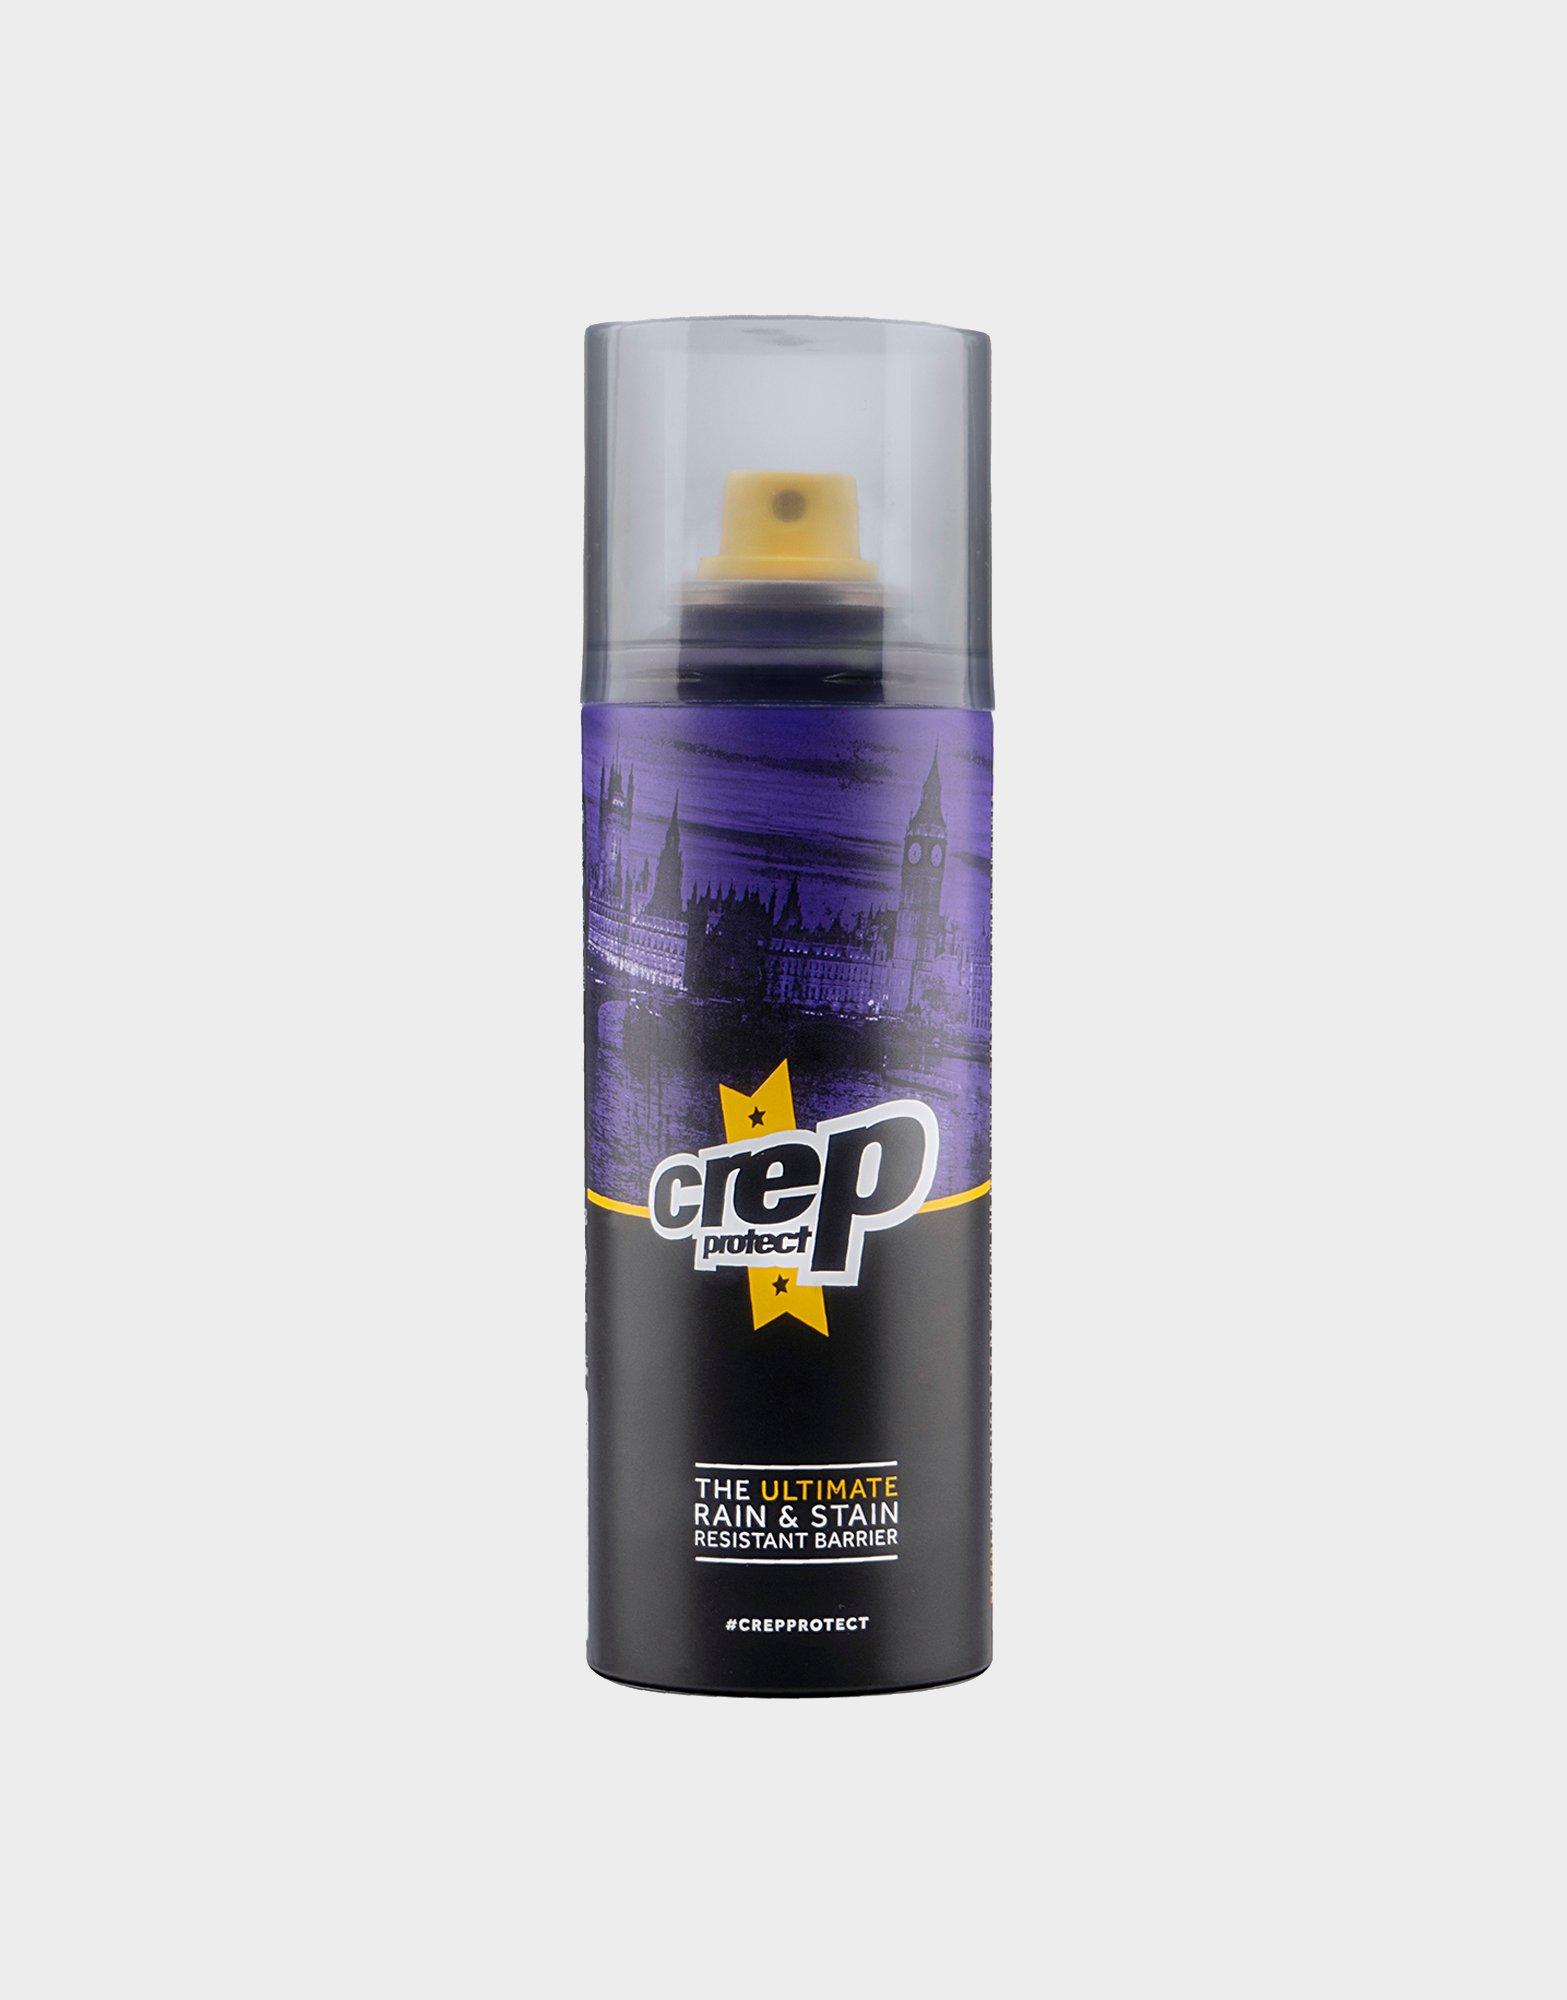 Crep Protect-water repellent spray for shoes - AliExpress